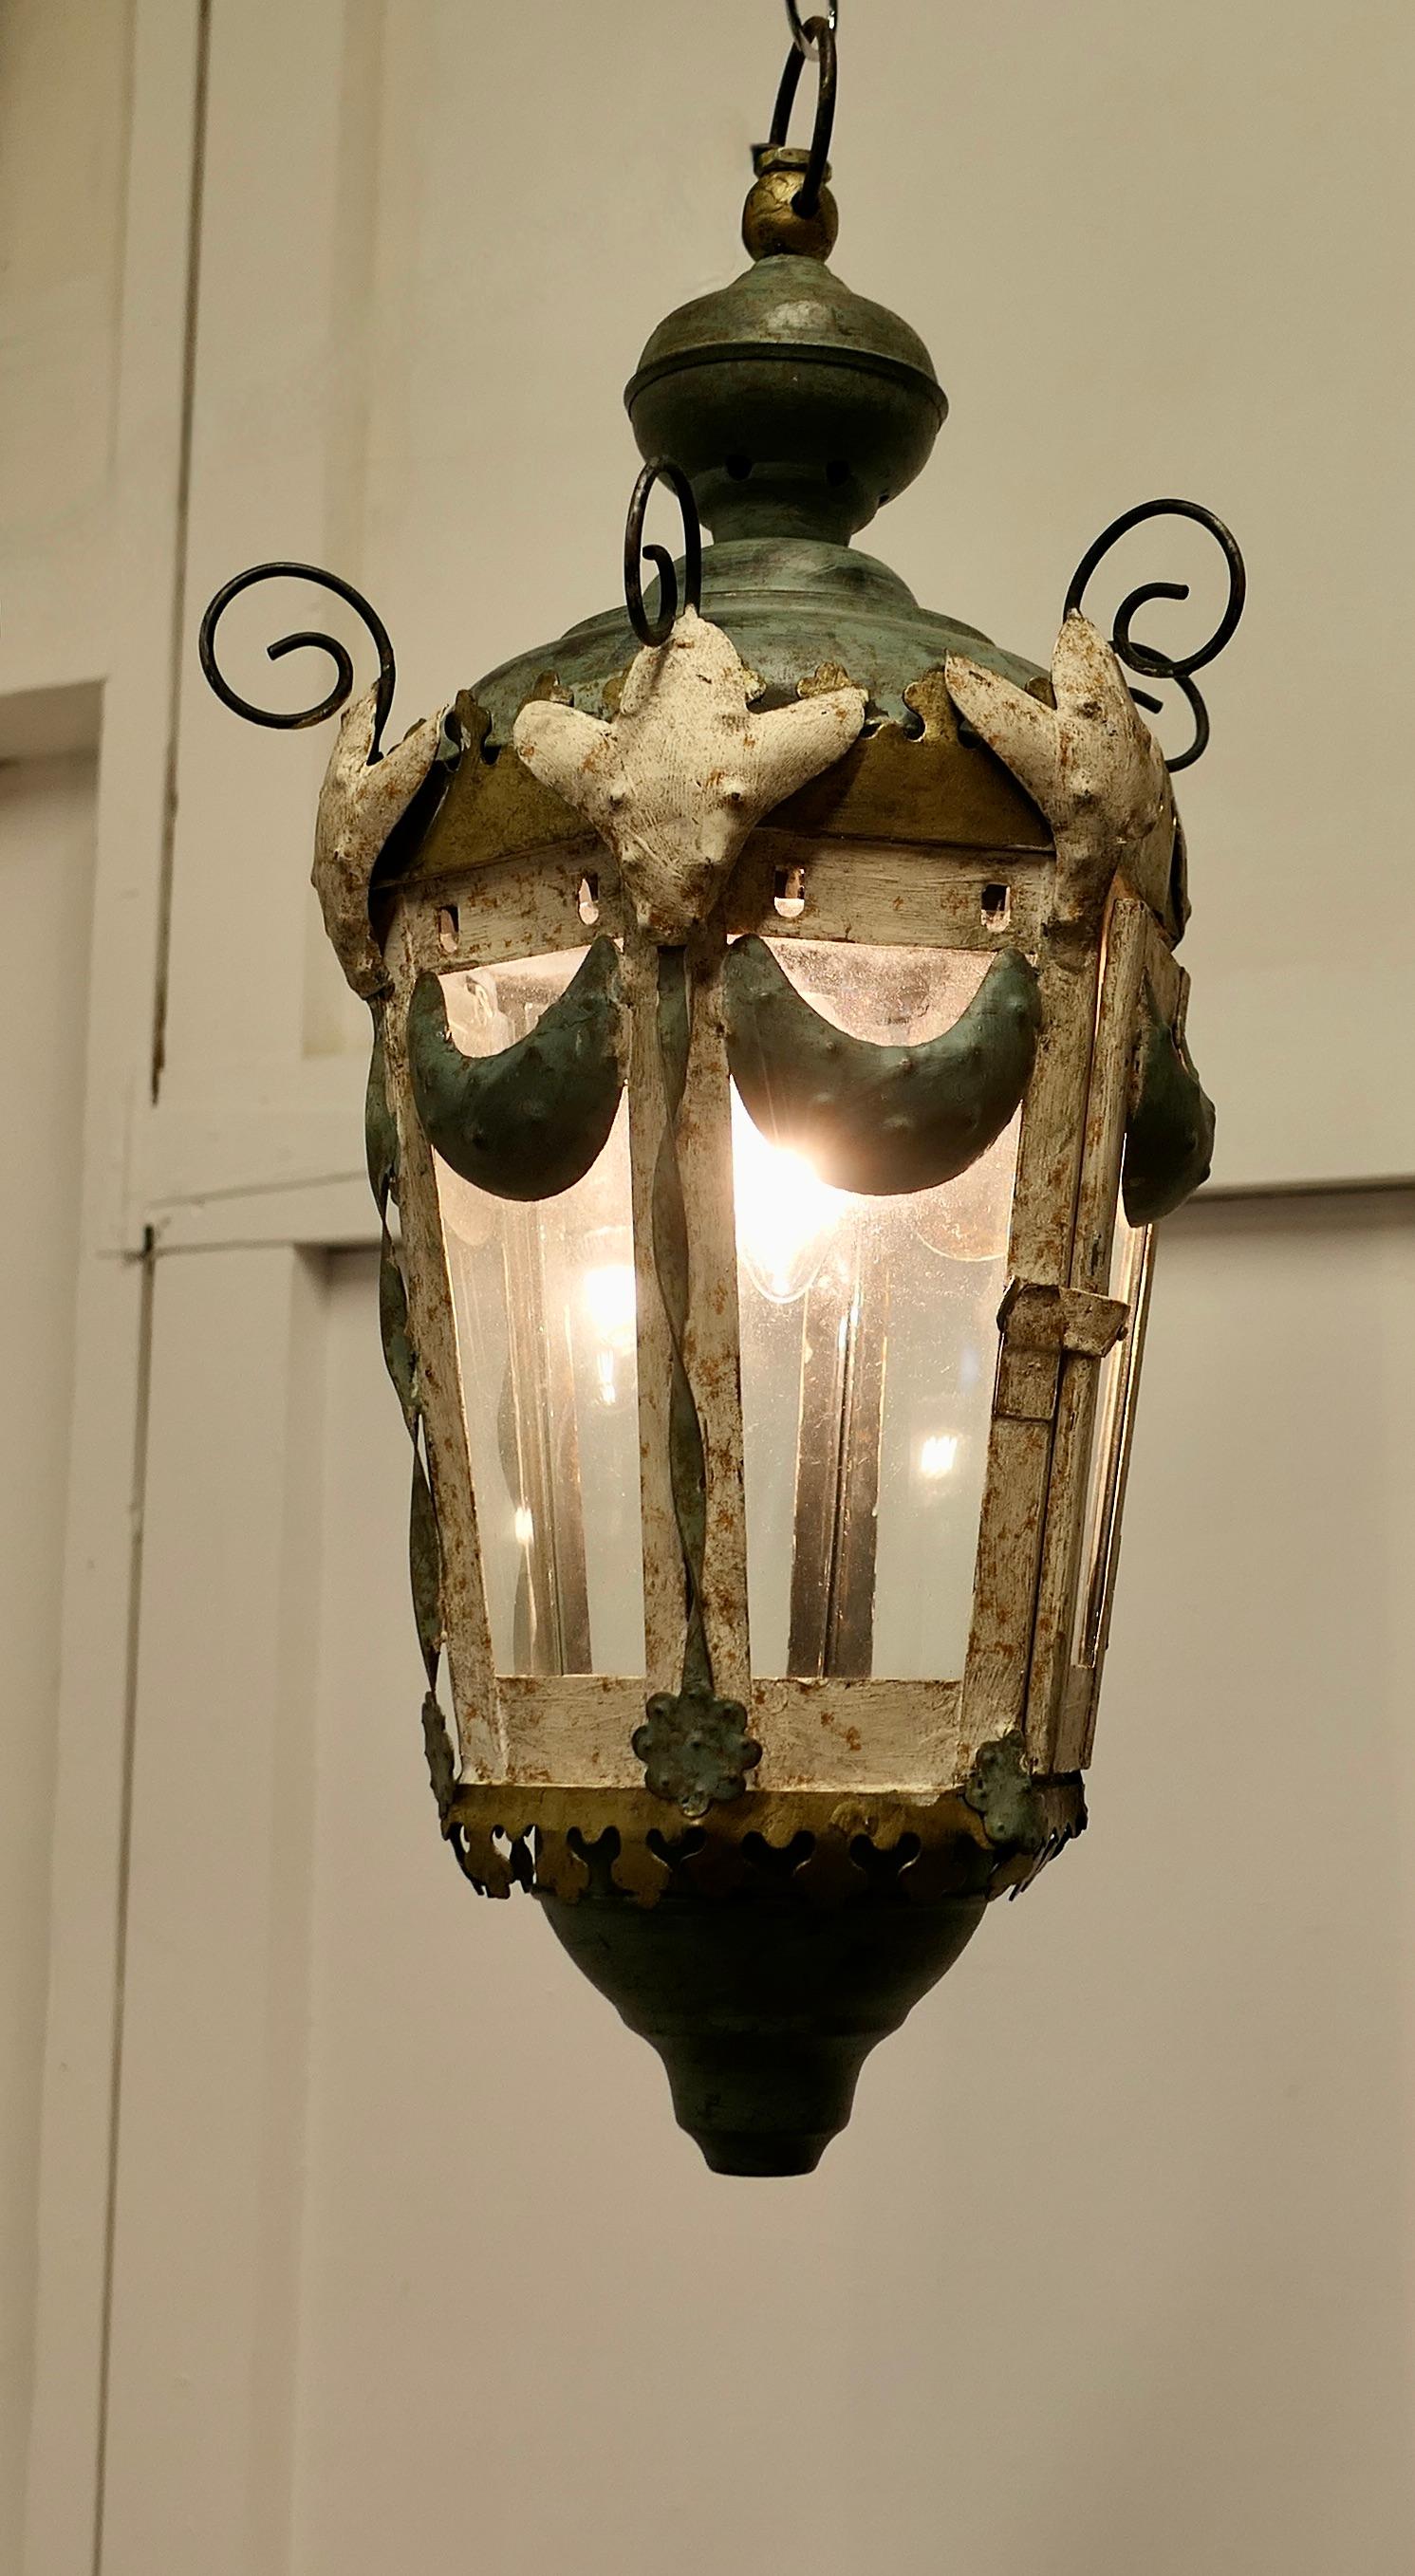 A Very Decorative Italian Tolwear Lantern

This very unusual Hall Lantern is painted to simulate verdigris patination, the Lamp has 6 sides 
(one of these is a locking opening door to access the interior)

This very unusual Baroque light is wired